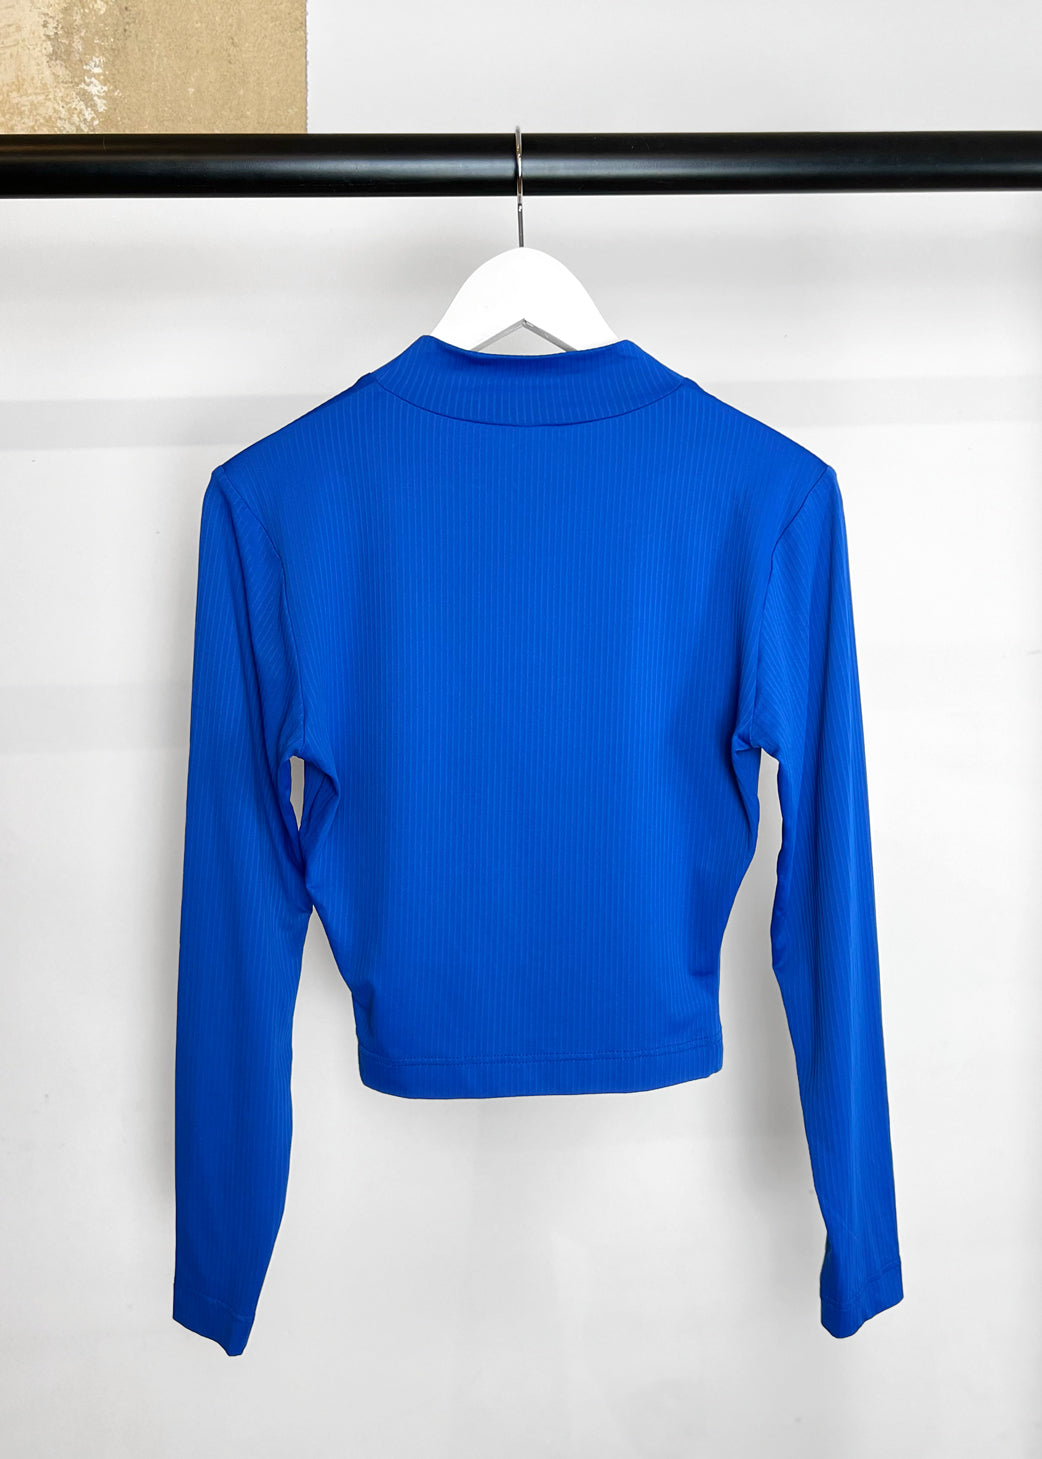 Long Sleeve Top in Electric Blue Ribbed Spandex "Vicky”